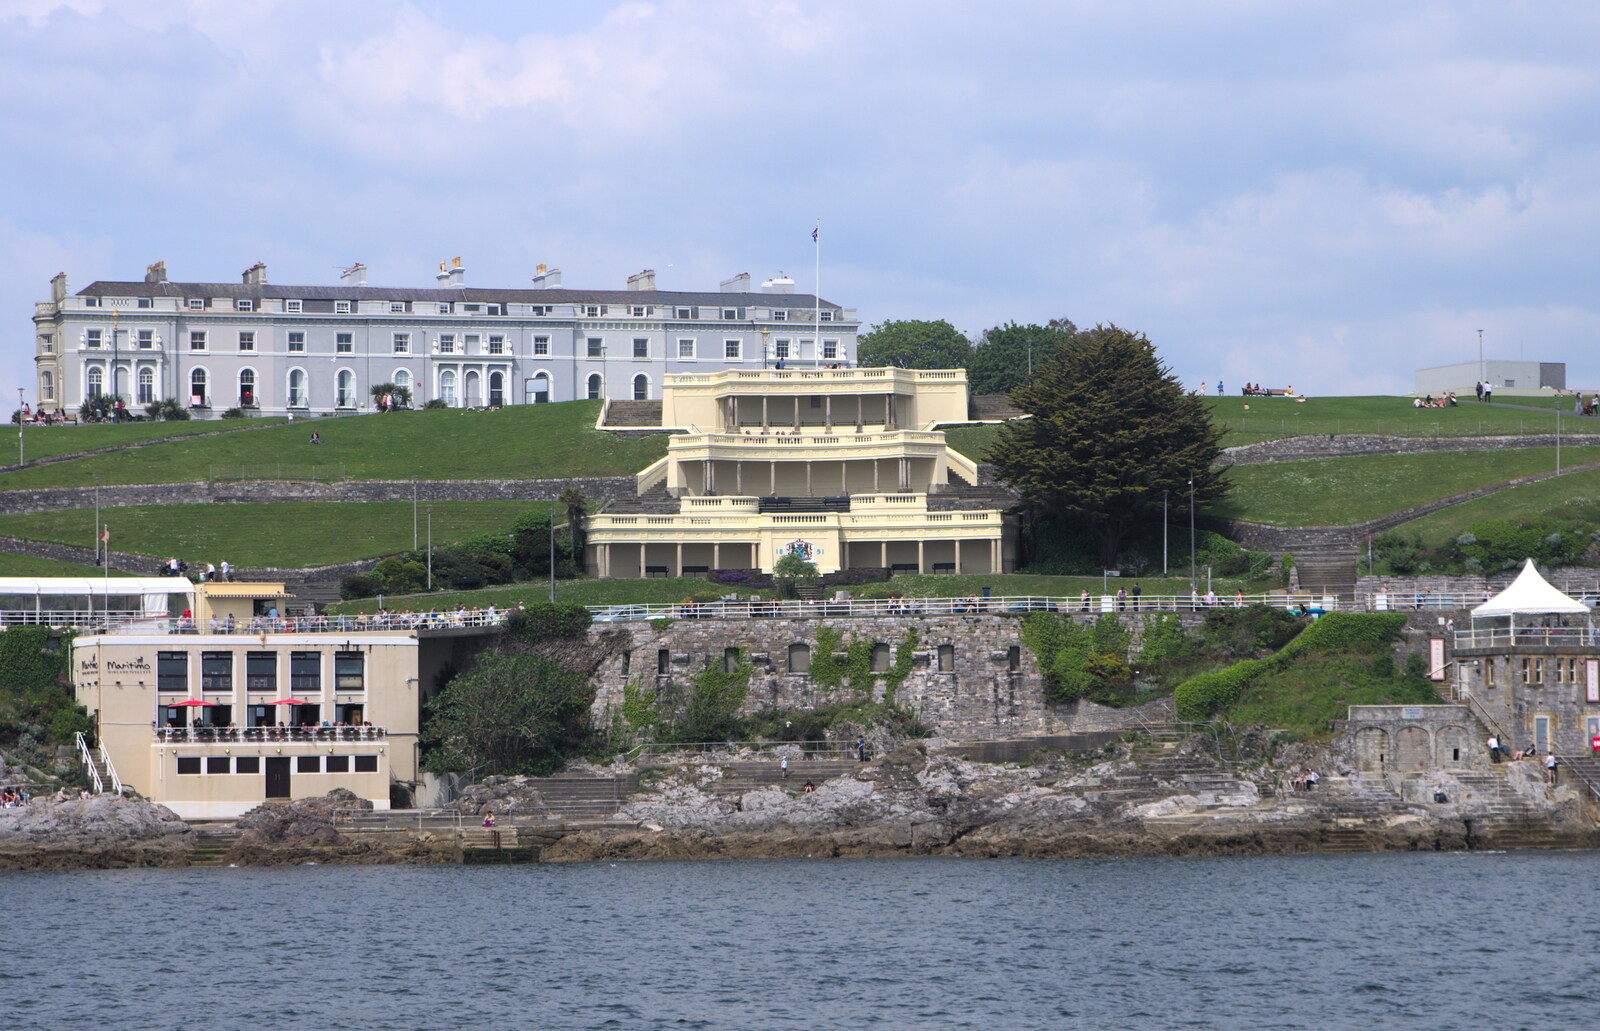 The Belvedere from A Tamar River Trip, Plymouth, Devon - 30th May 2016